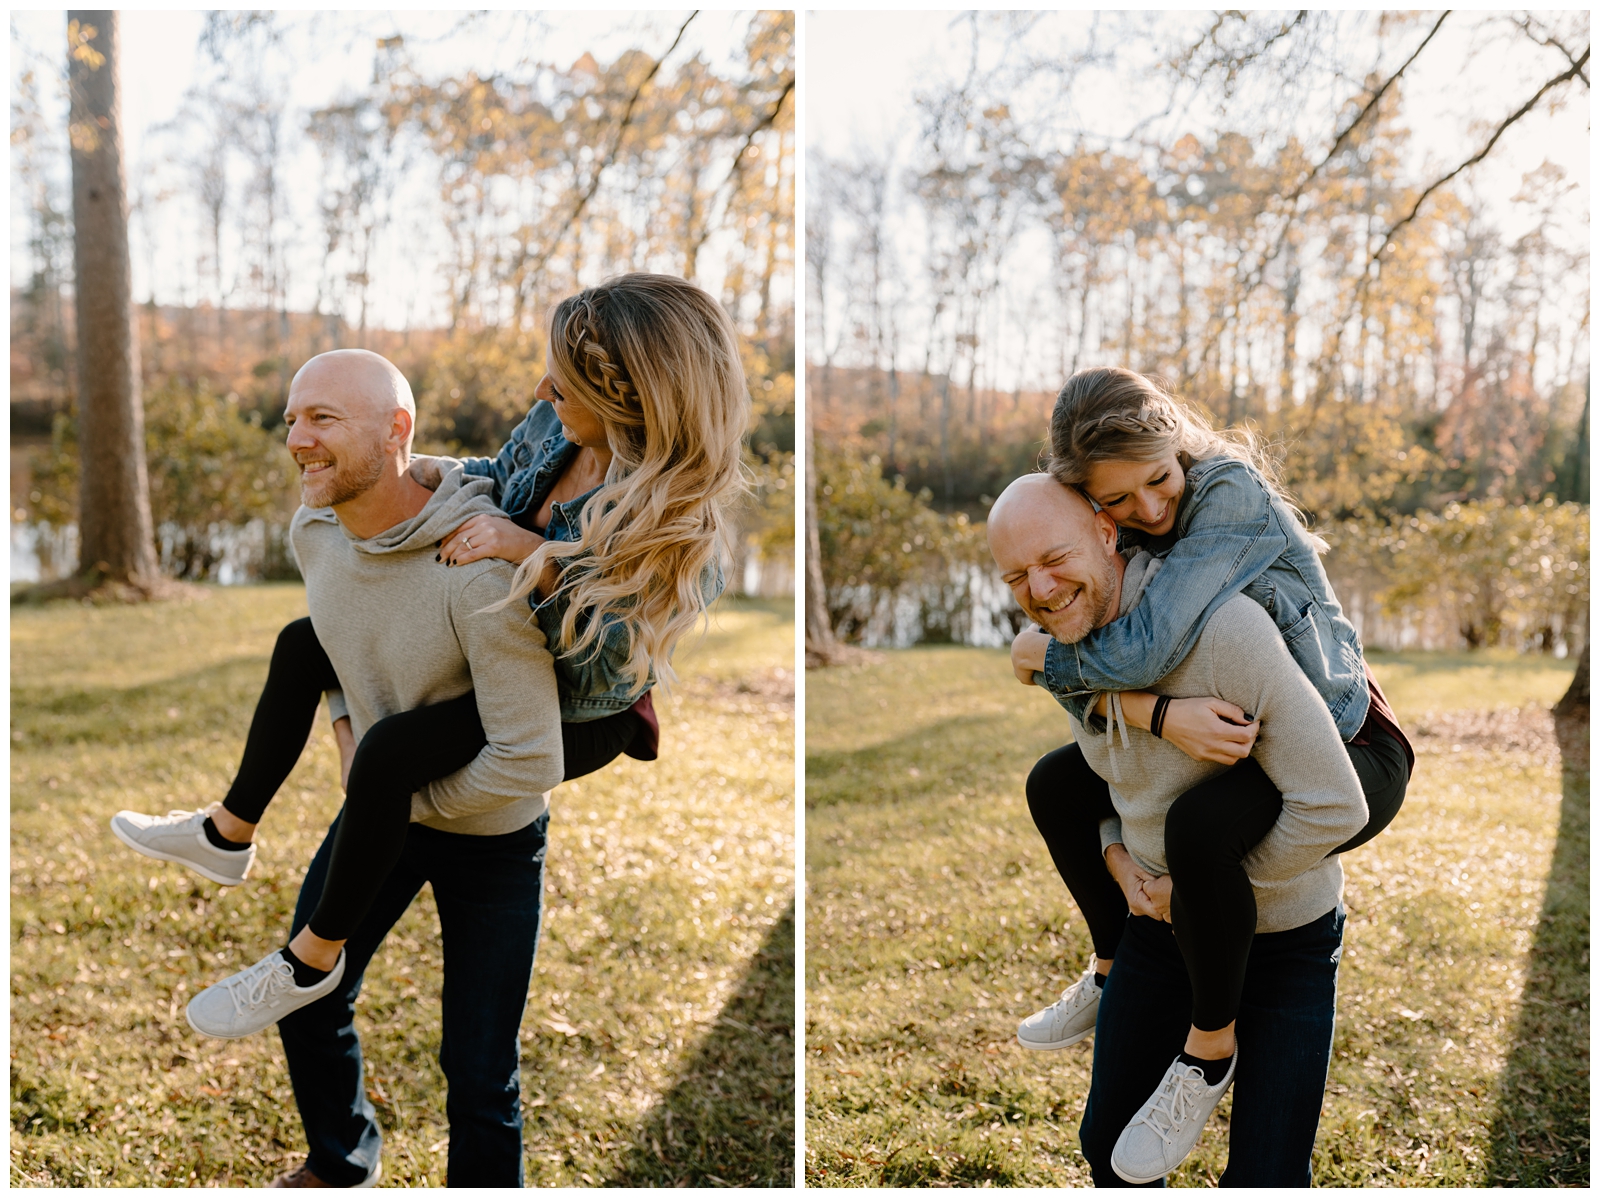 Fun and laid back engagement session in Greensboro, NC by North Carolina photographer